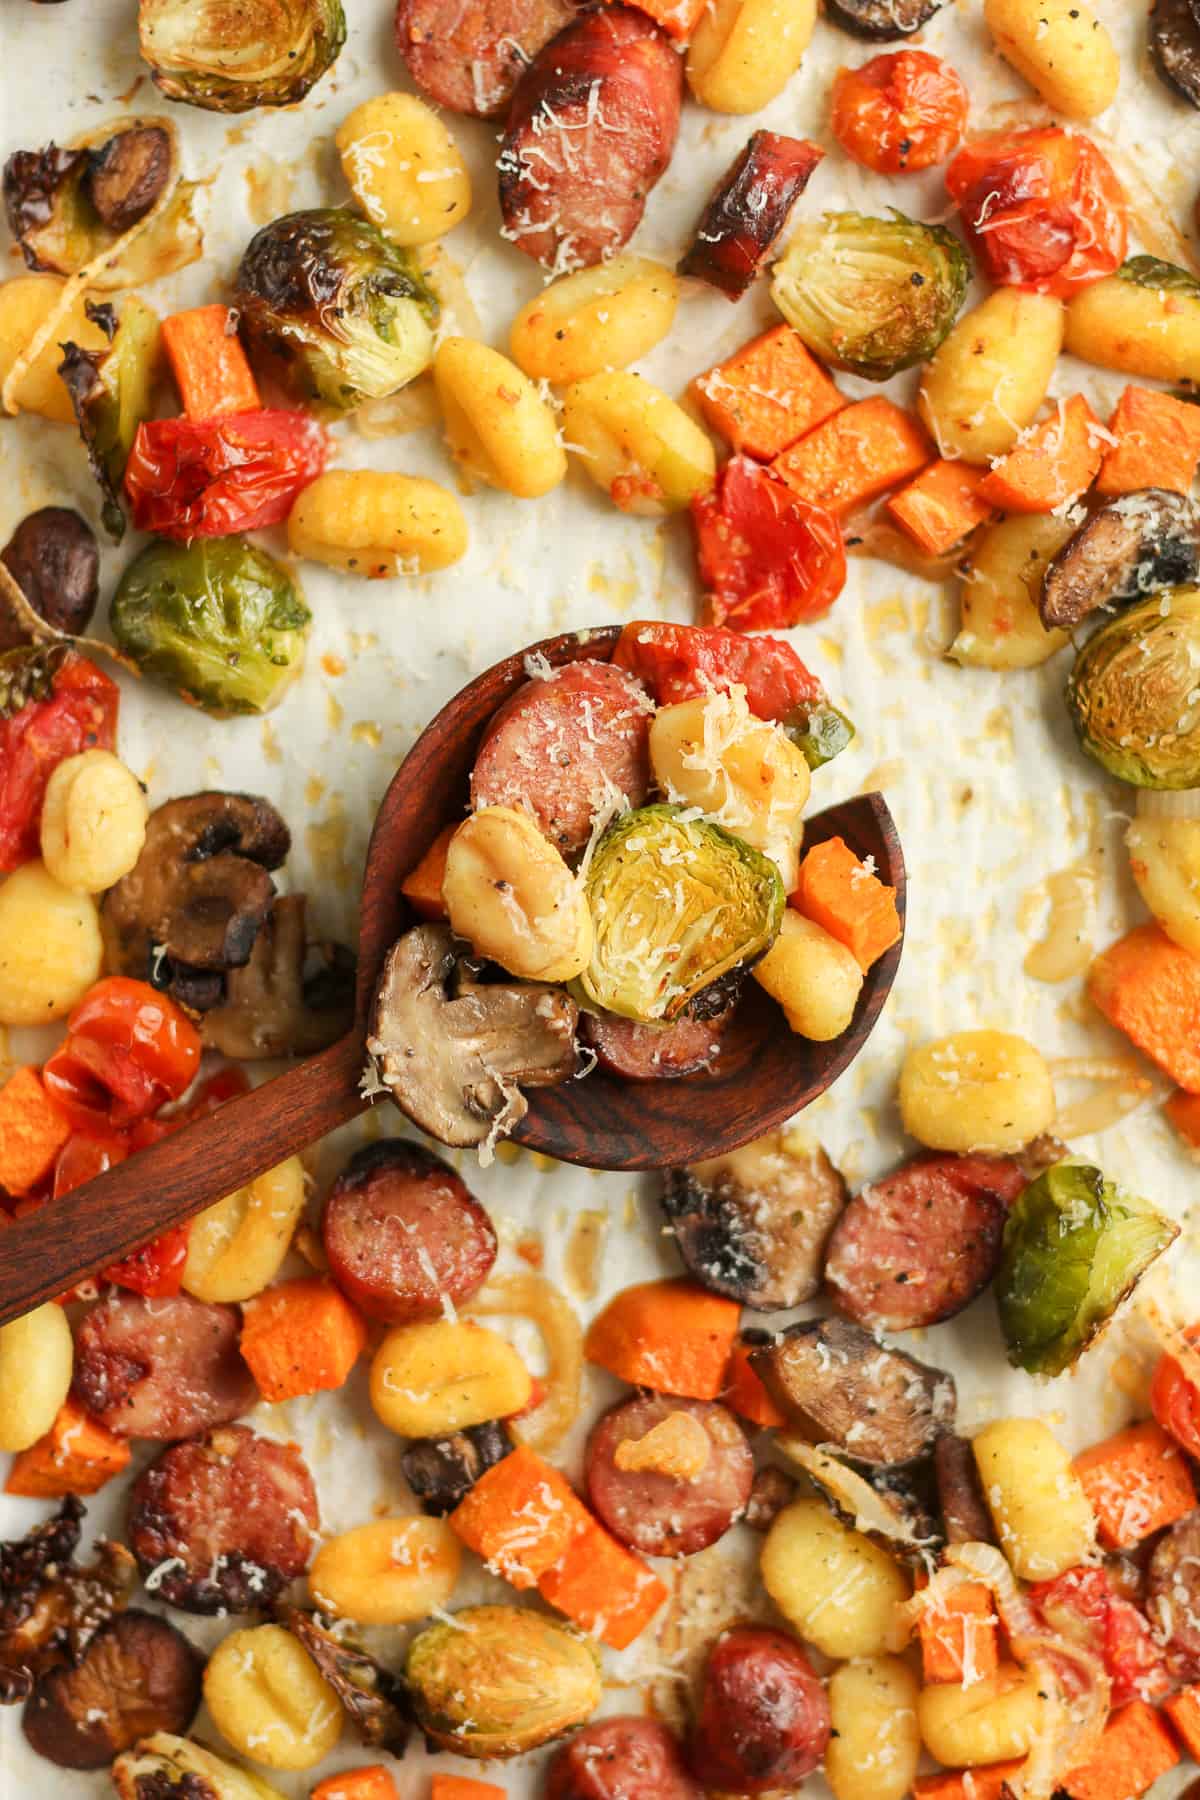 Overhead shot of a spoonful of the gnocchi and veggies.